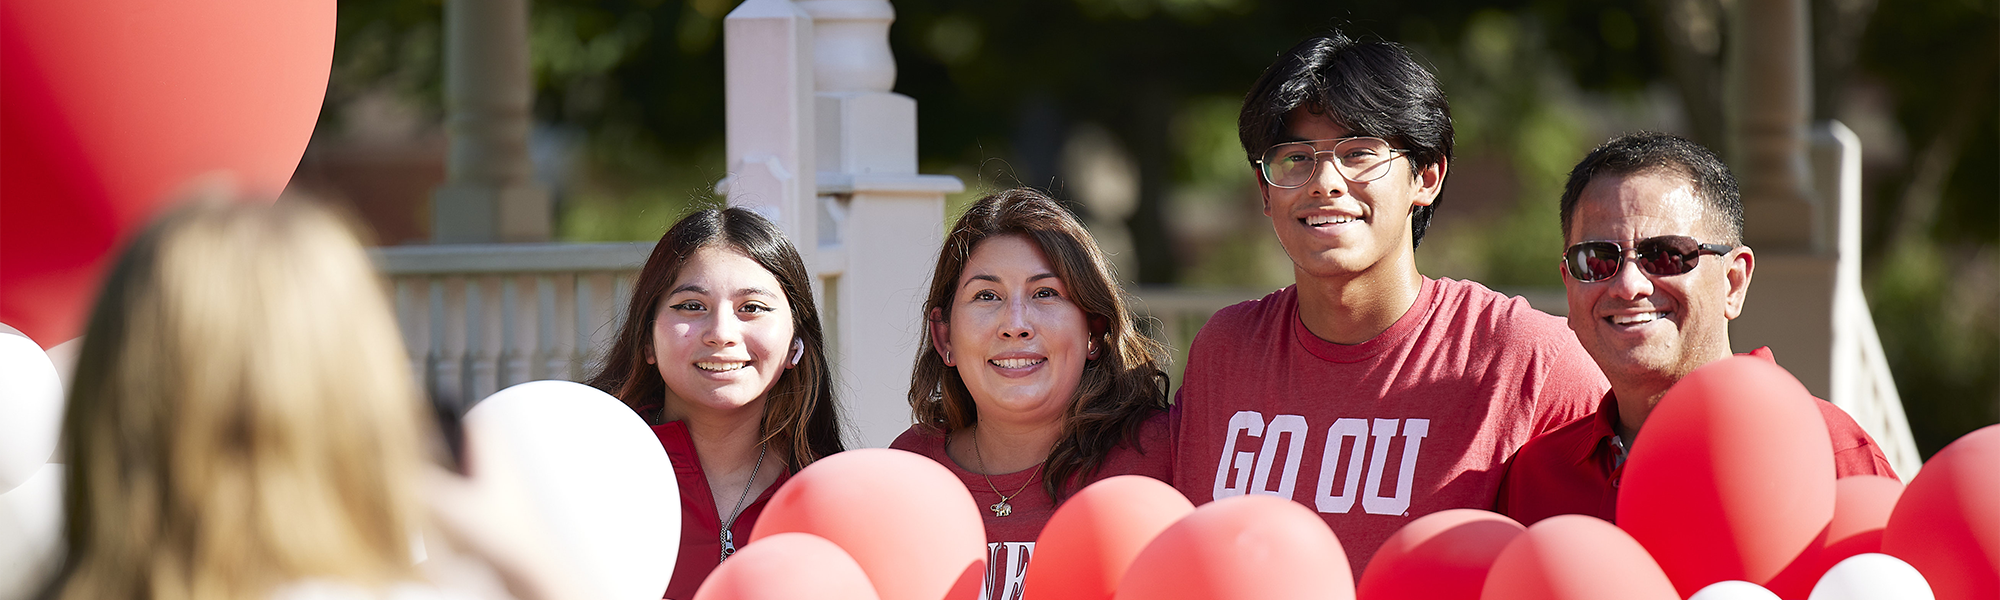 A family of four wearing OU shirts and surrounded by balloons poses for a photo at the University of Oklahoma.